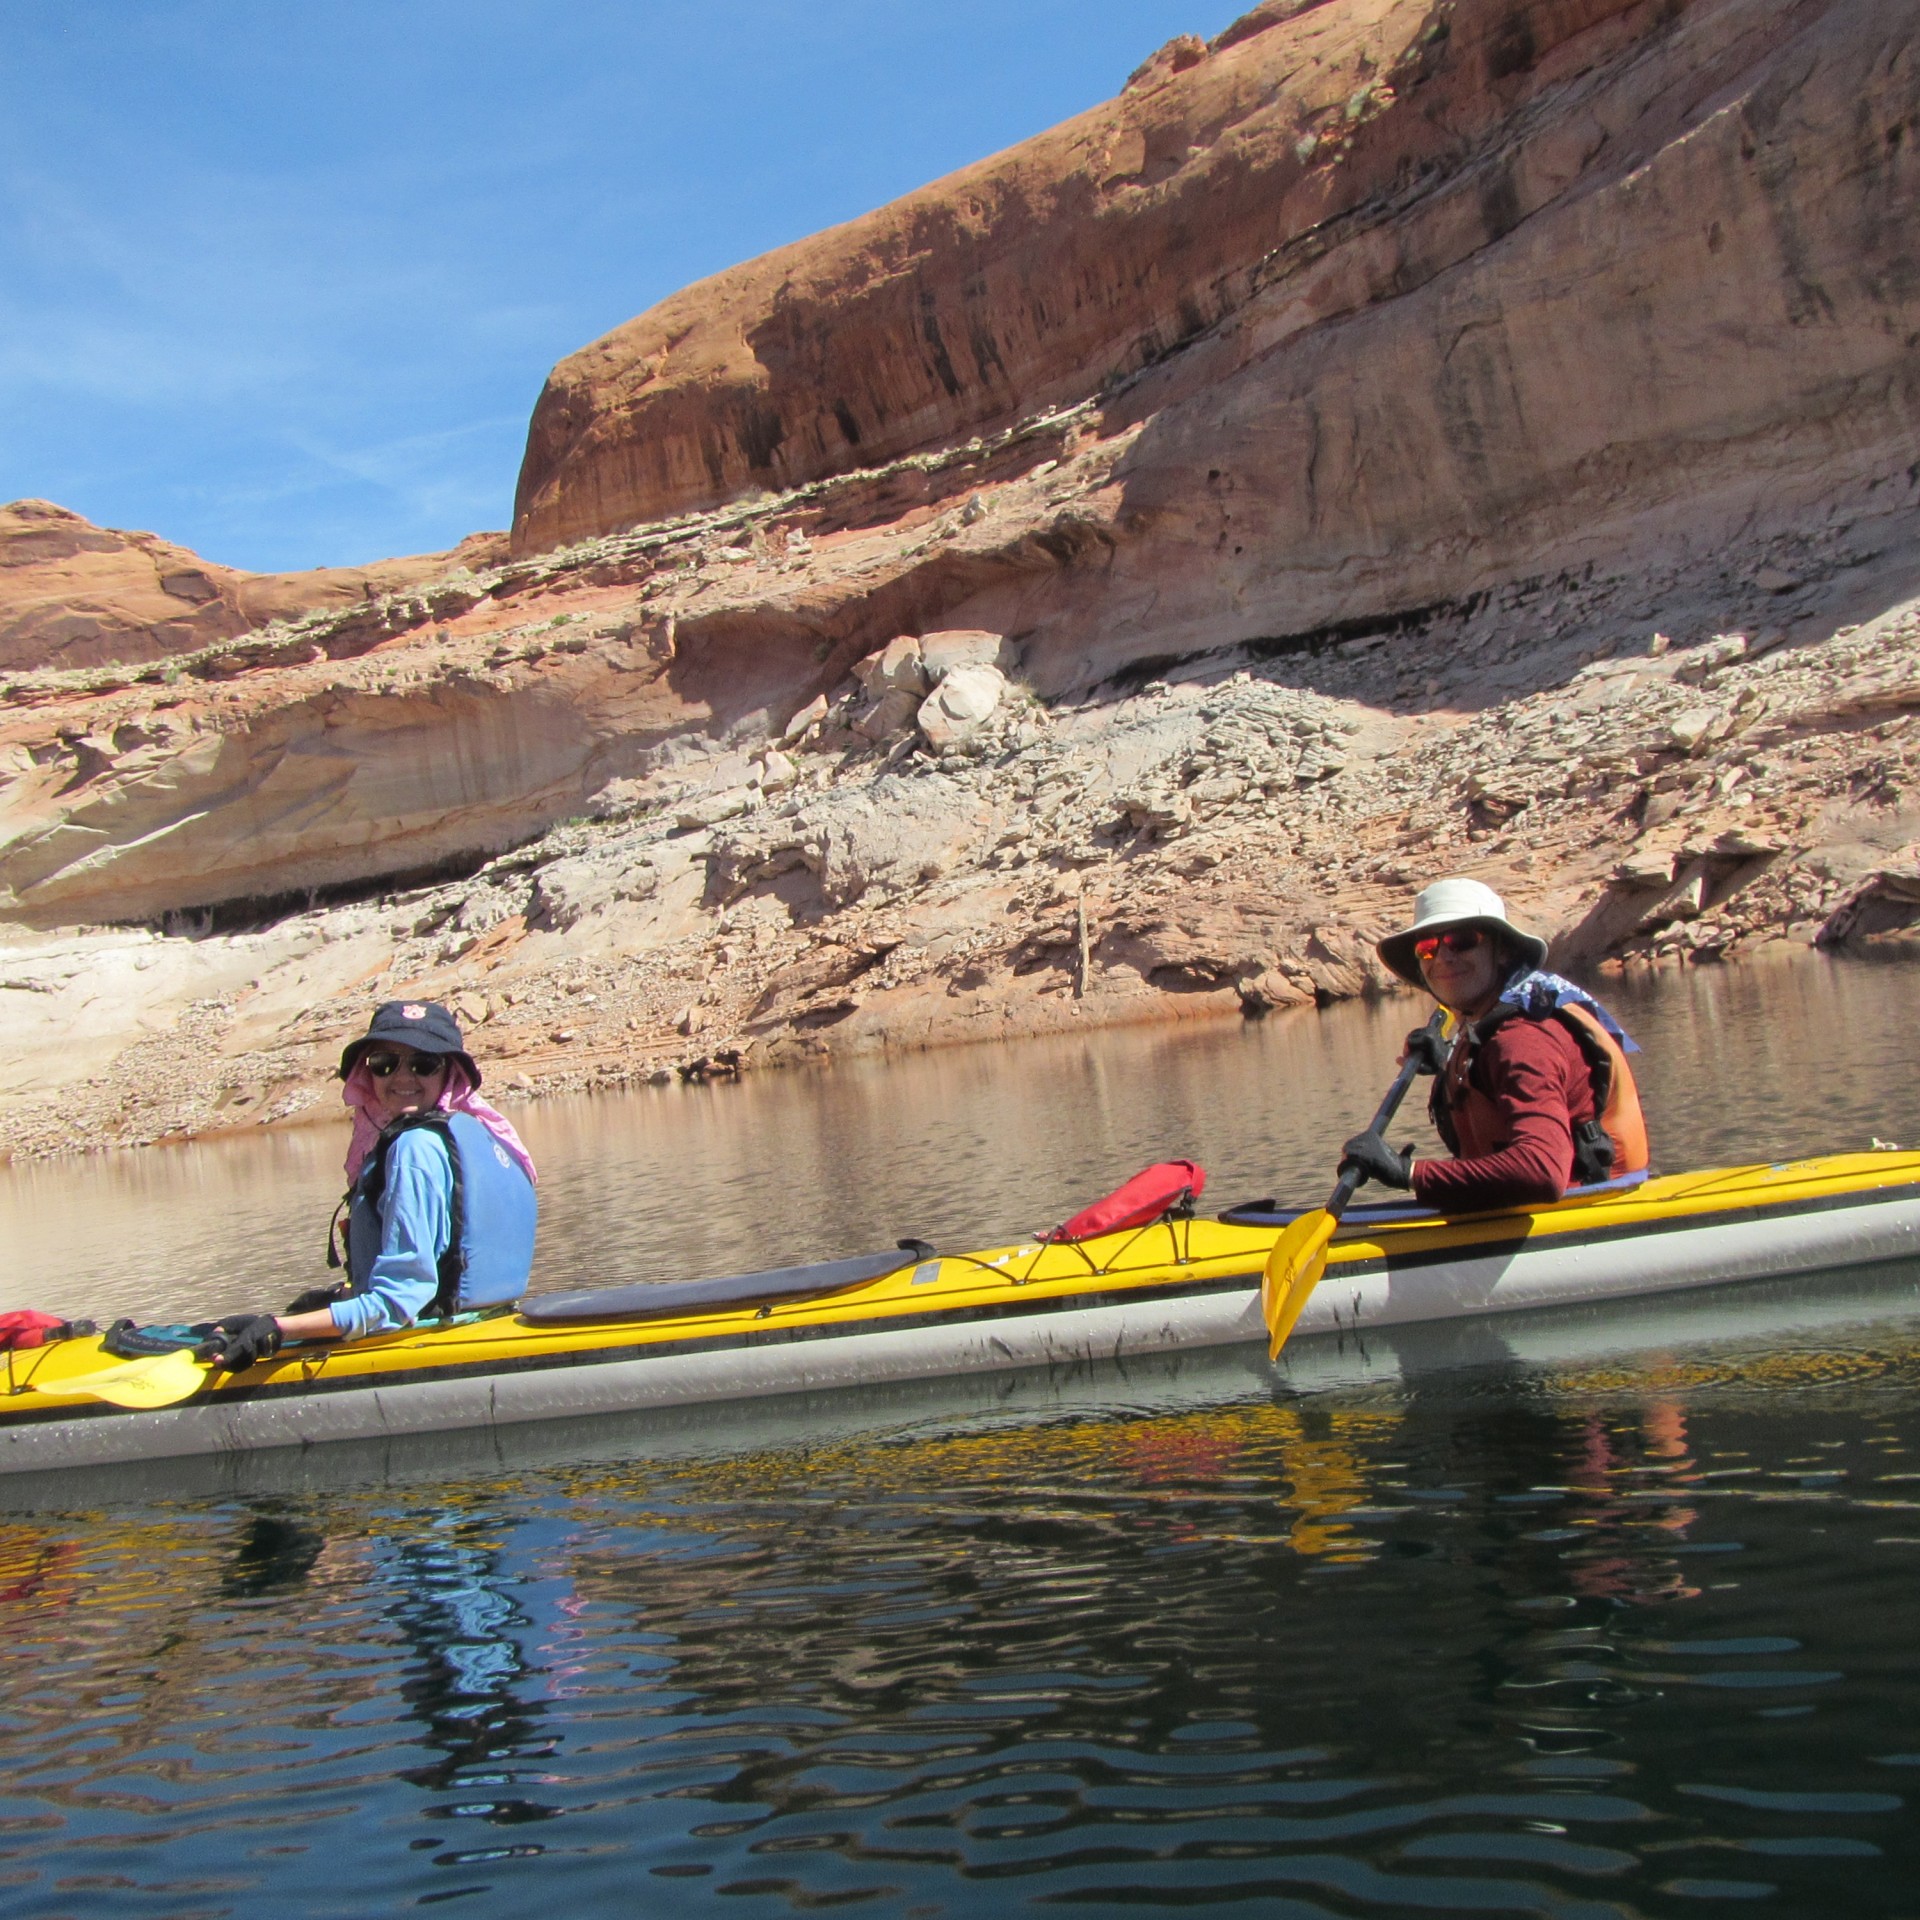 Students in kayaks